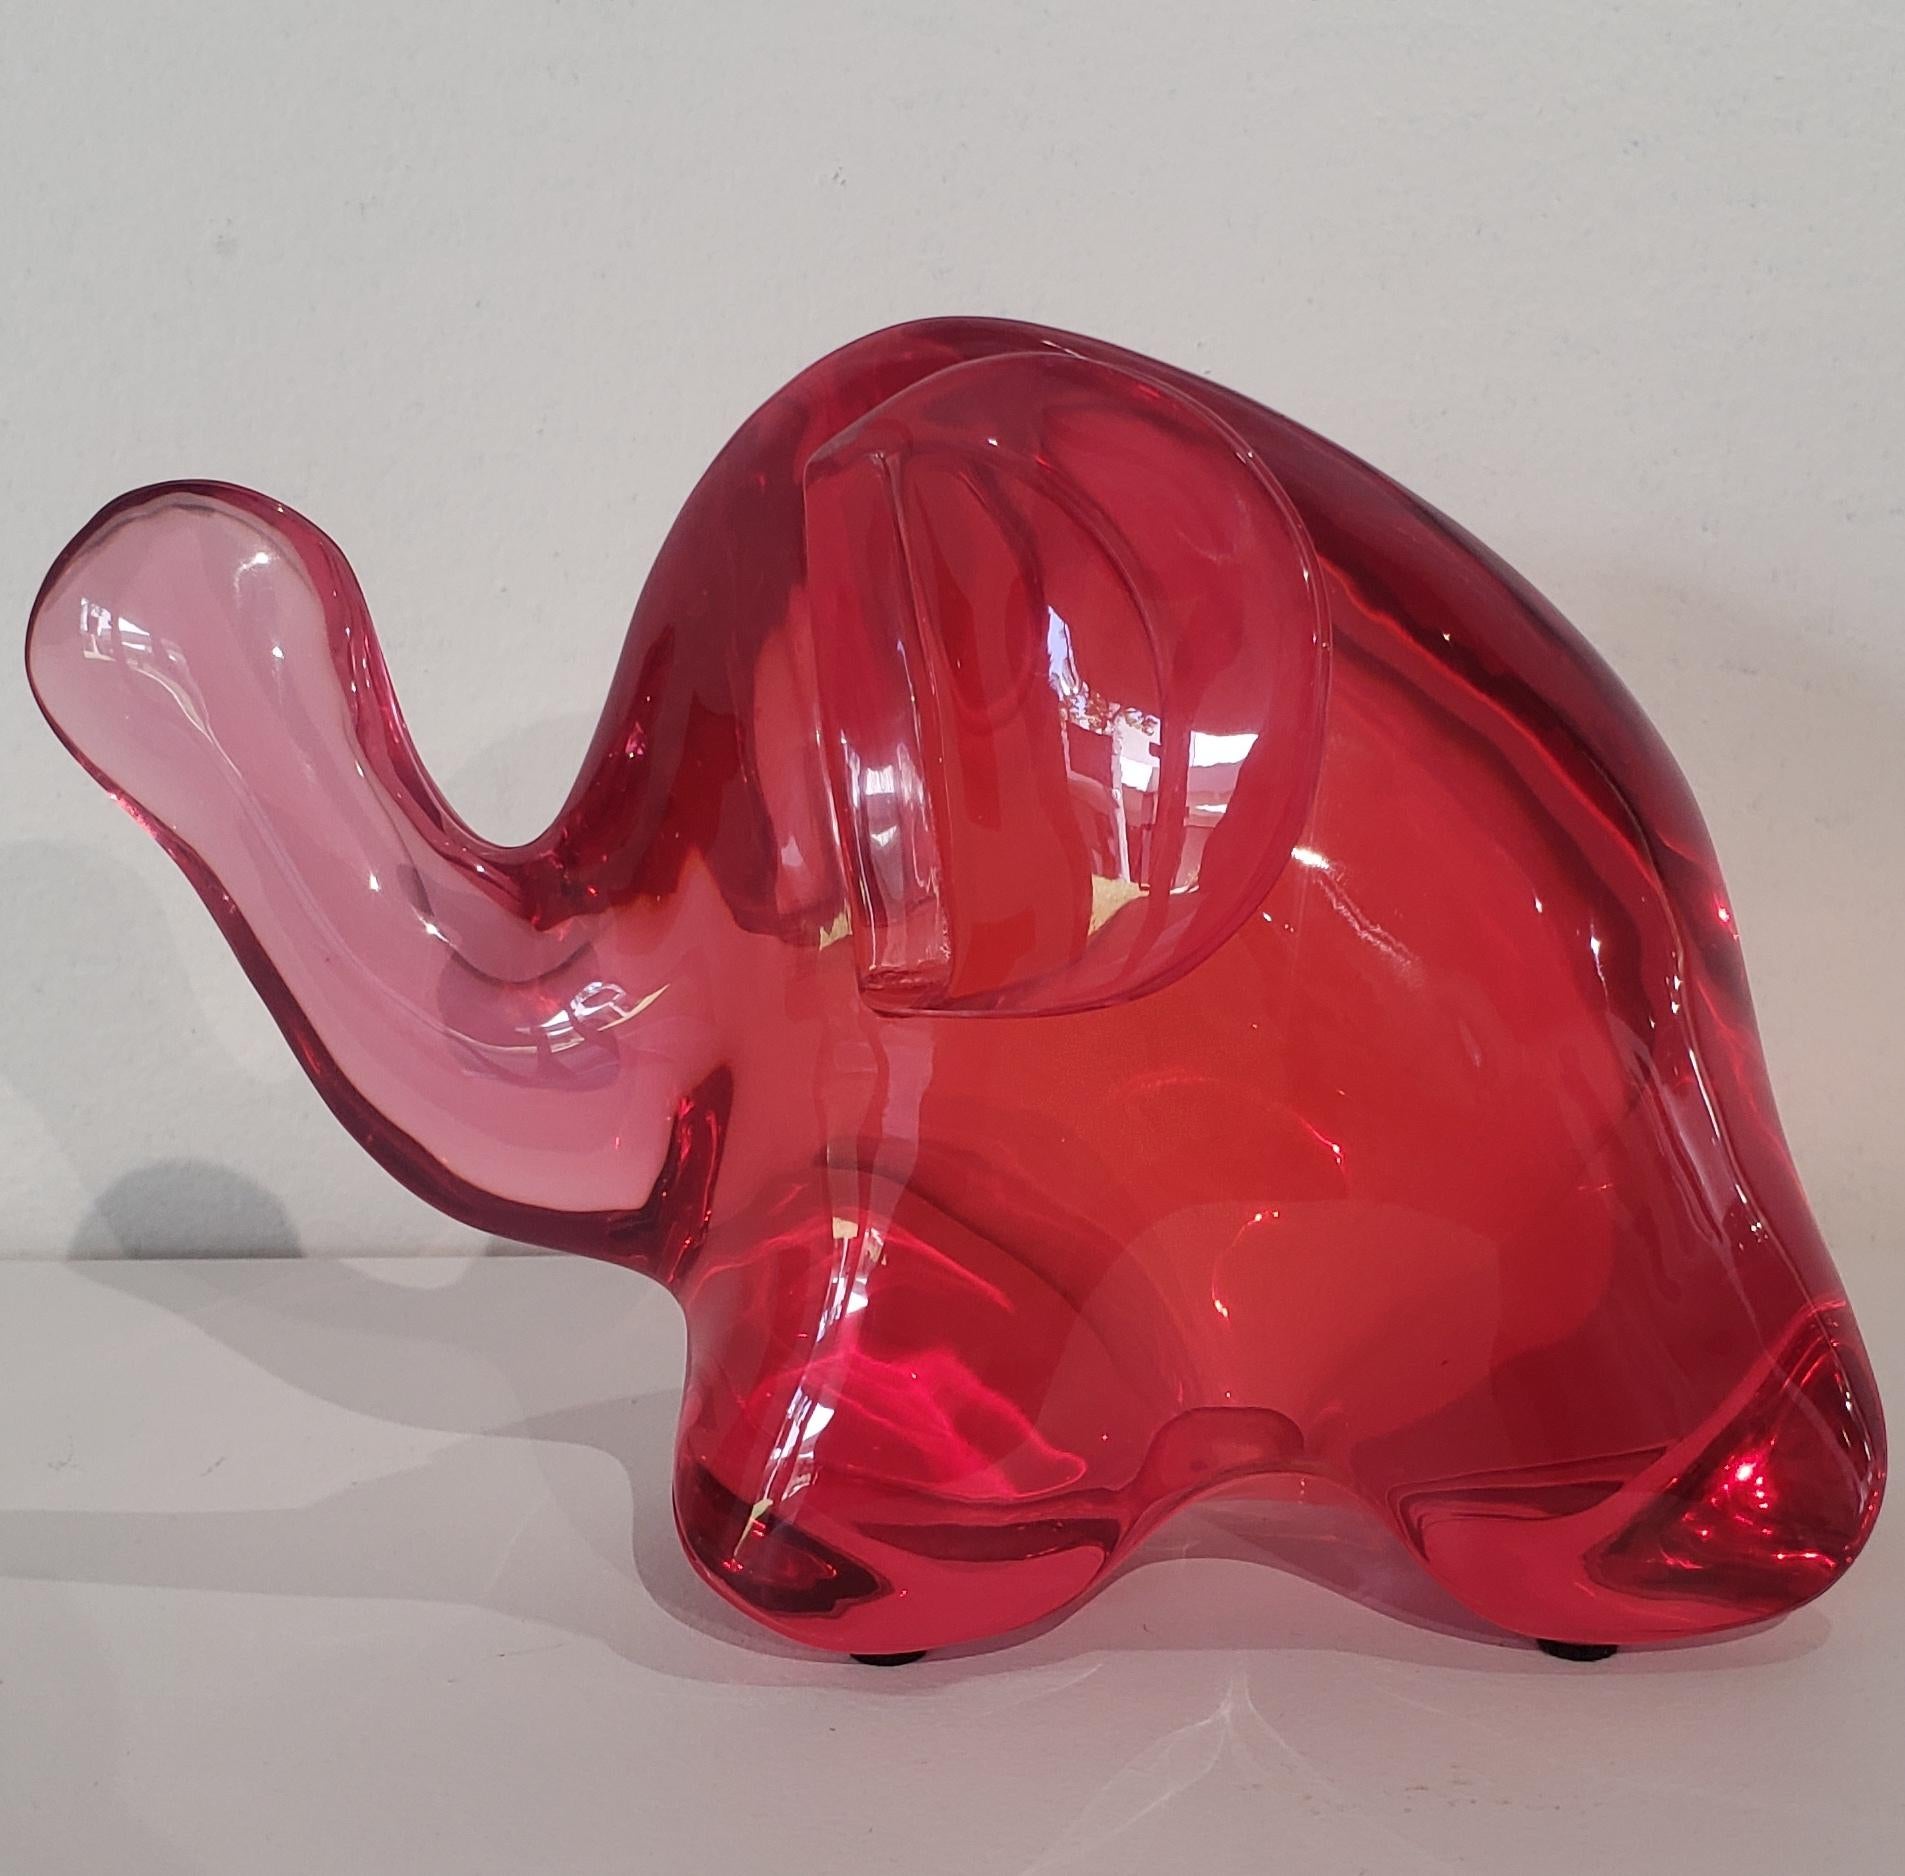 Christopher Schulz Figurative Sculpture - Luck Elephant Berry Red (Large)